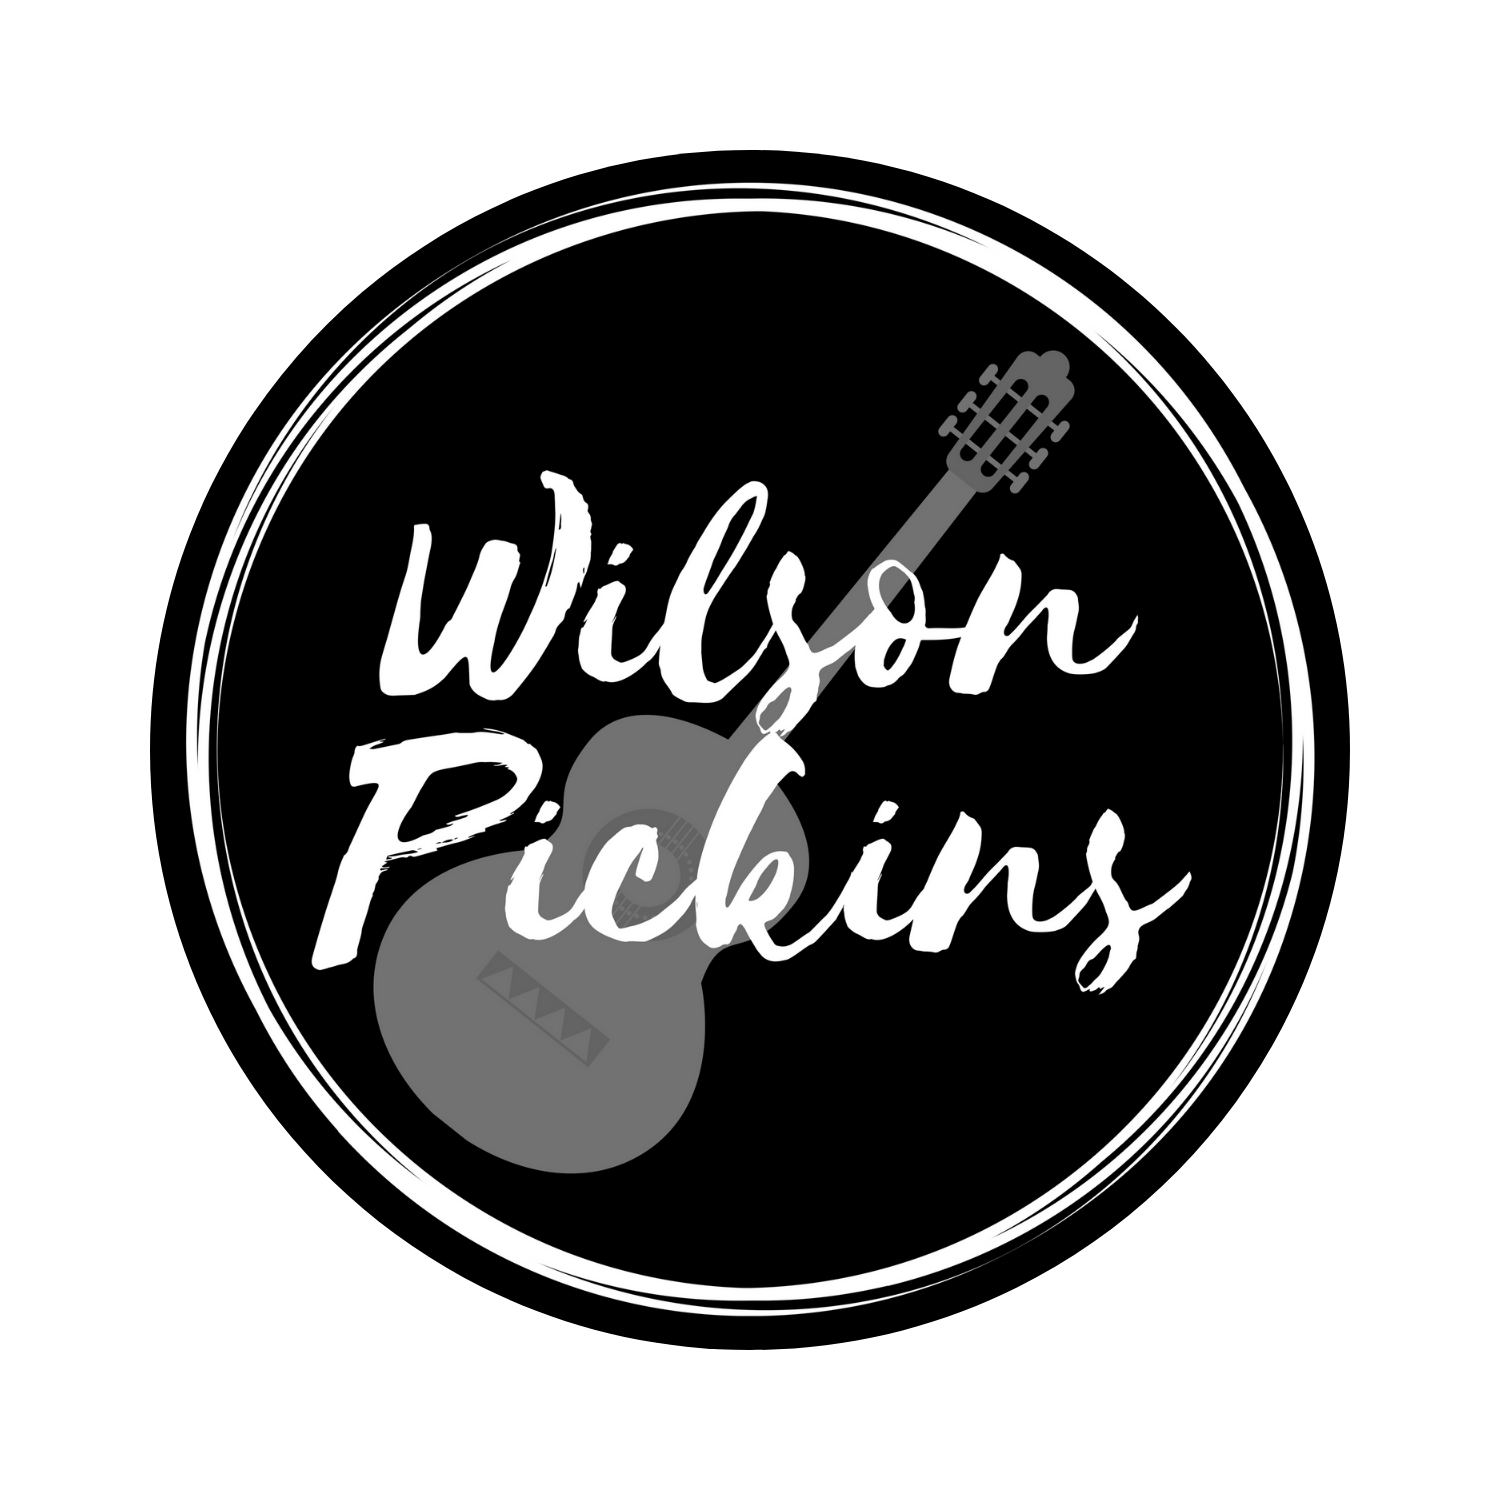 Wilson Pickins Promotions